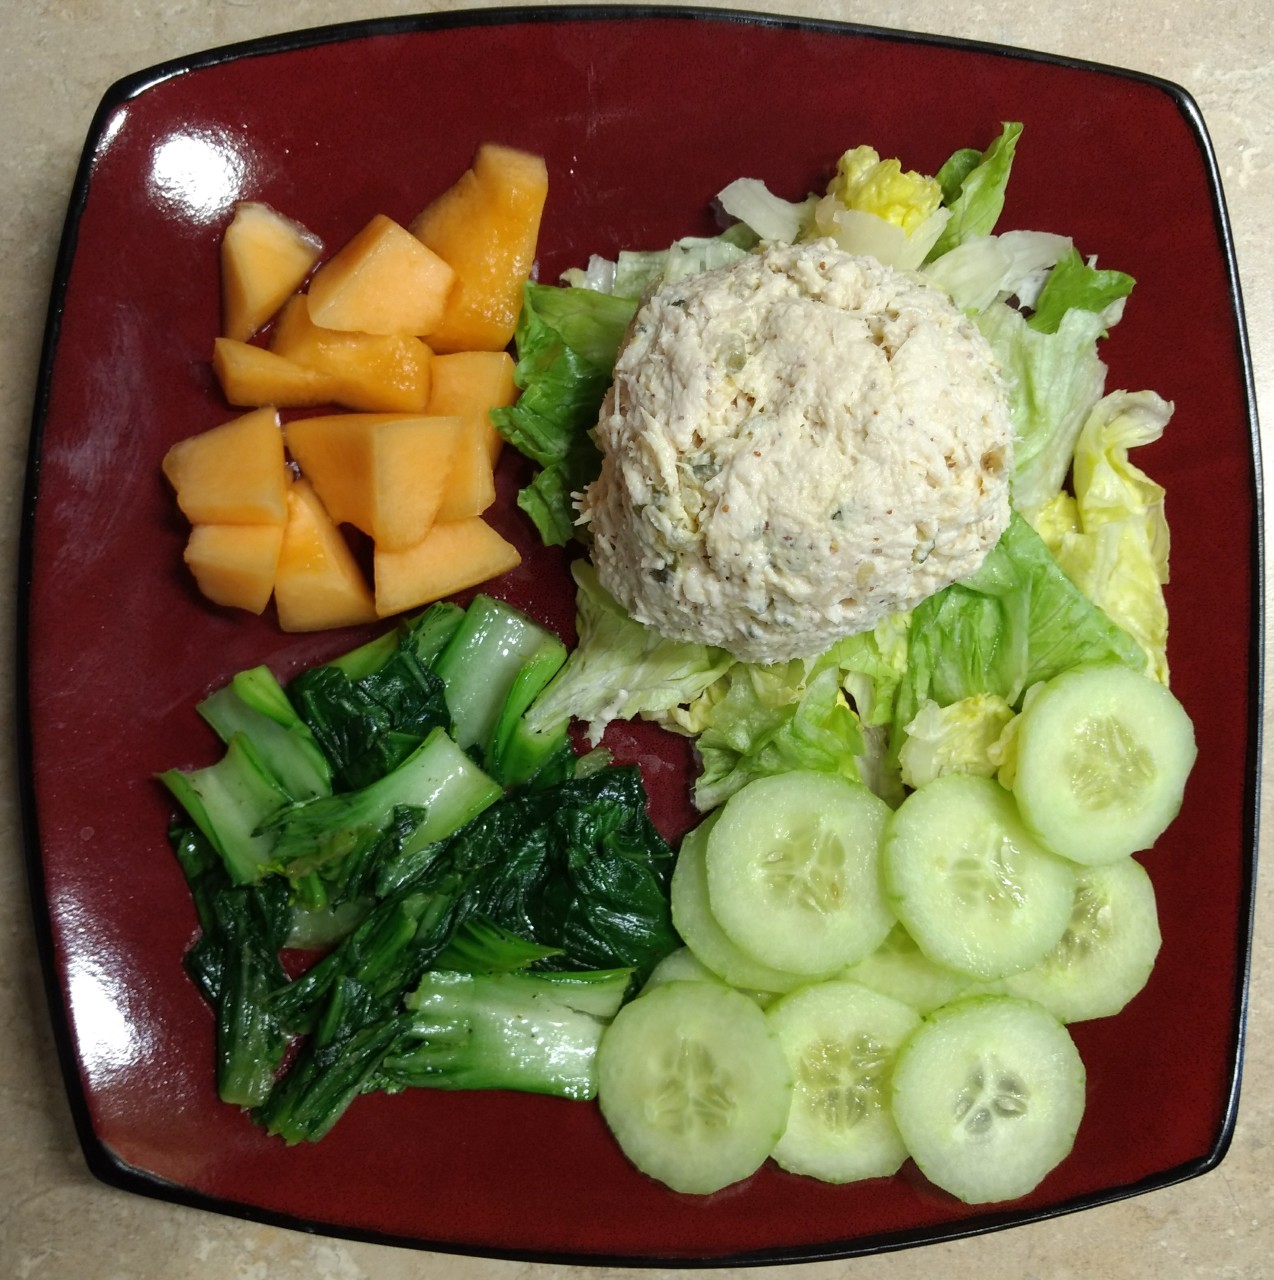 <a class="bx-tag" rel="tag" href="https://streetloc.com/view-channel-profile/whatsforlunch"><s>#</s><b>whatsforlunch</b></a> Chicken Salad, Sauteed Bok Choy, Cucumbers, and Cantaloupe